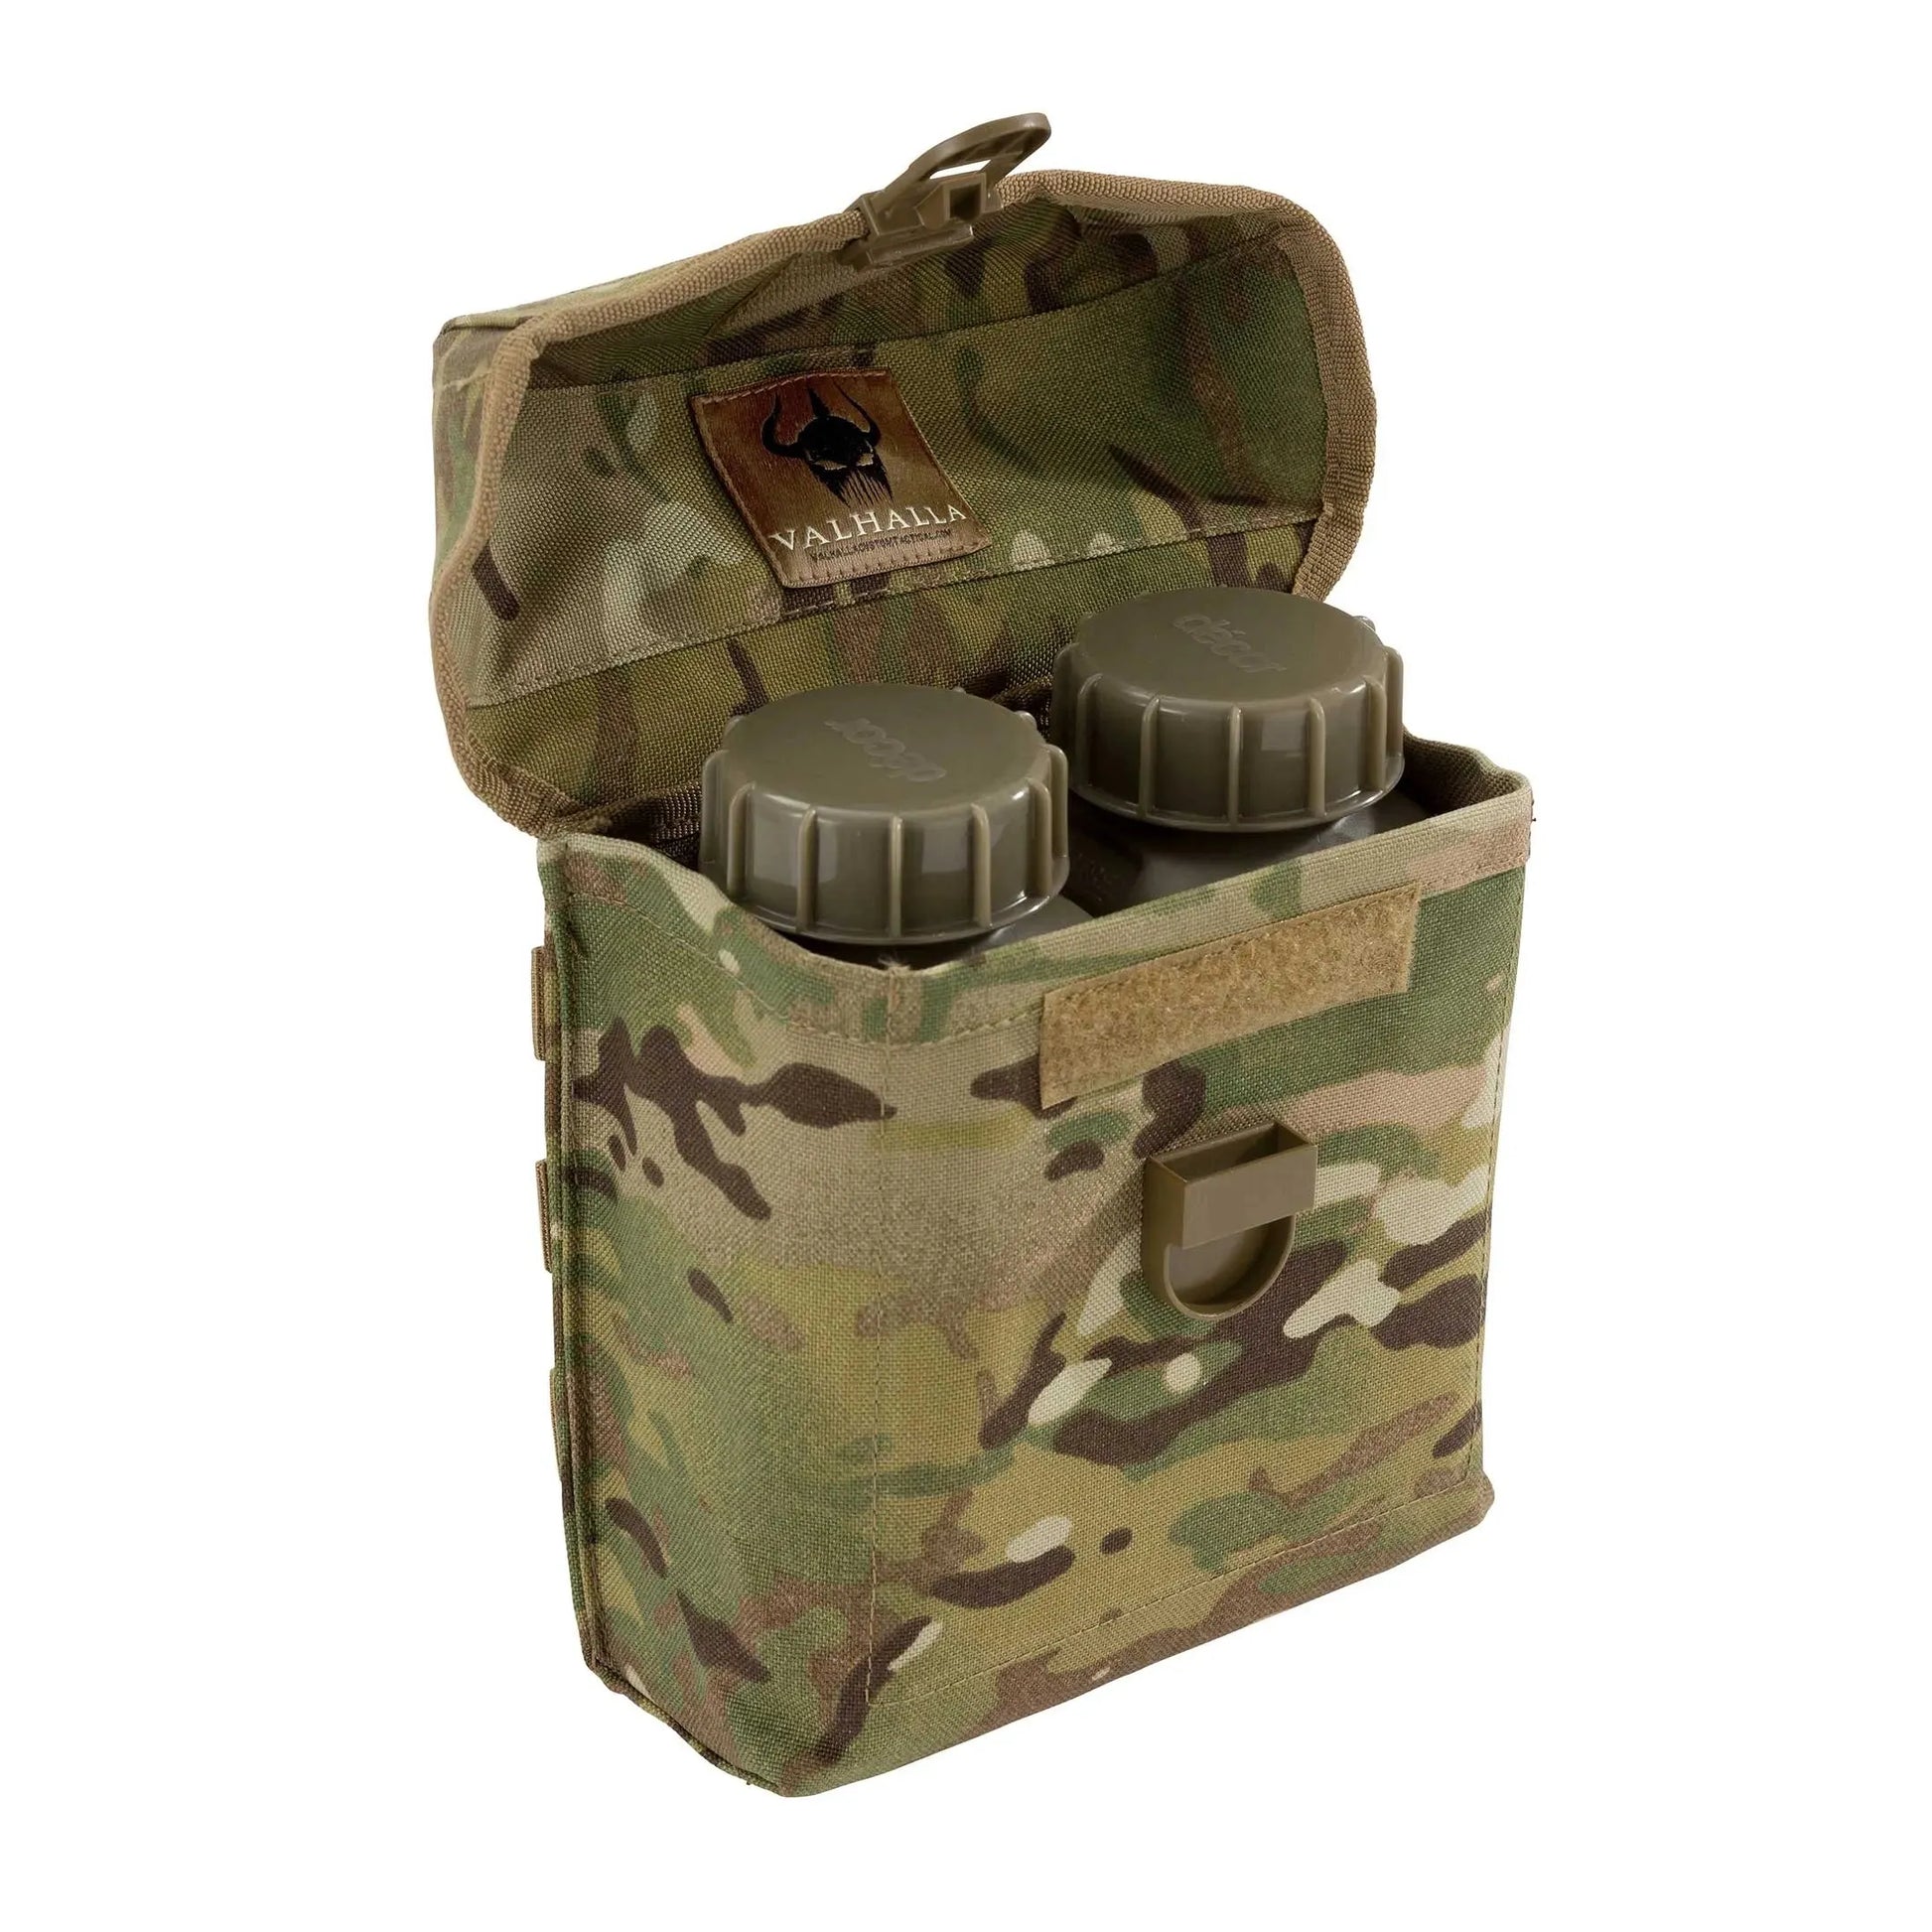 Tactical MOLLE Pouch by Valhalla JustGoodKit Tactical MOLLE Pouch by Valhalla Pouch